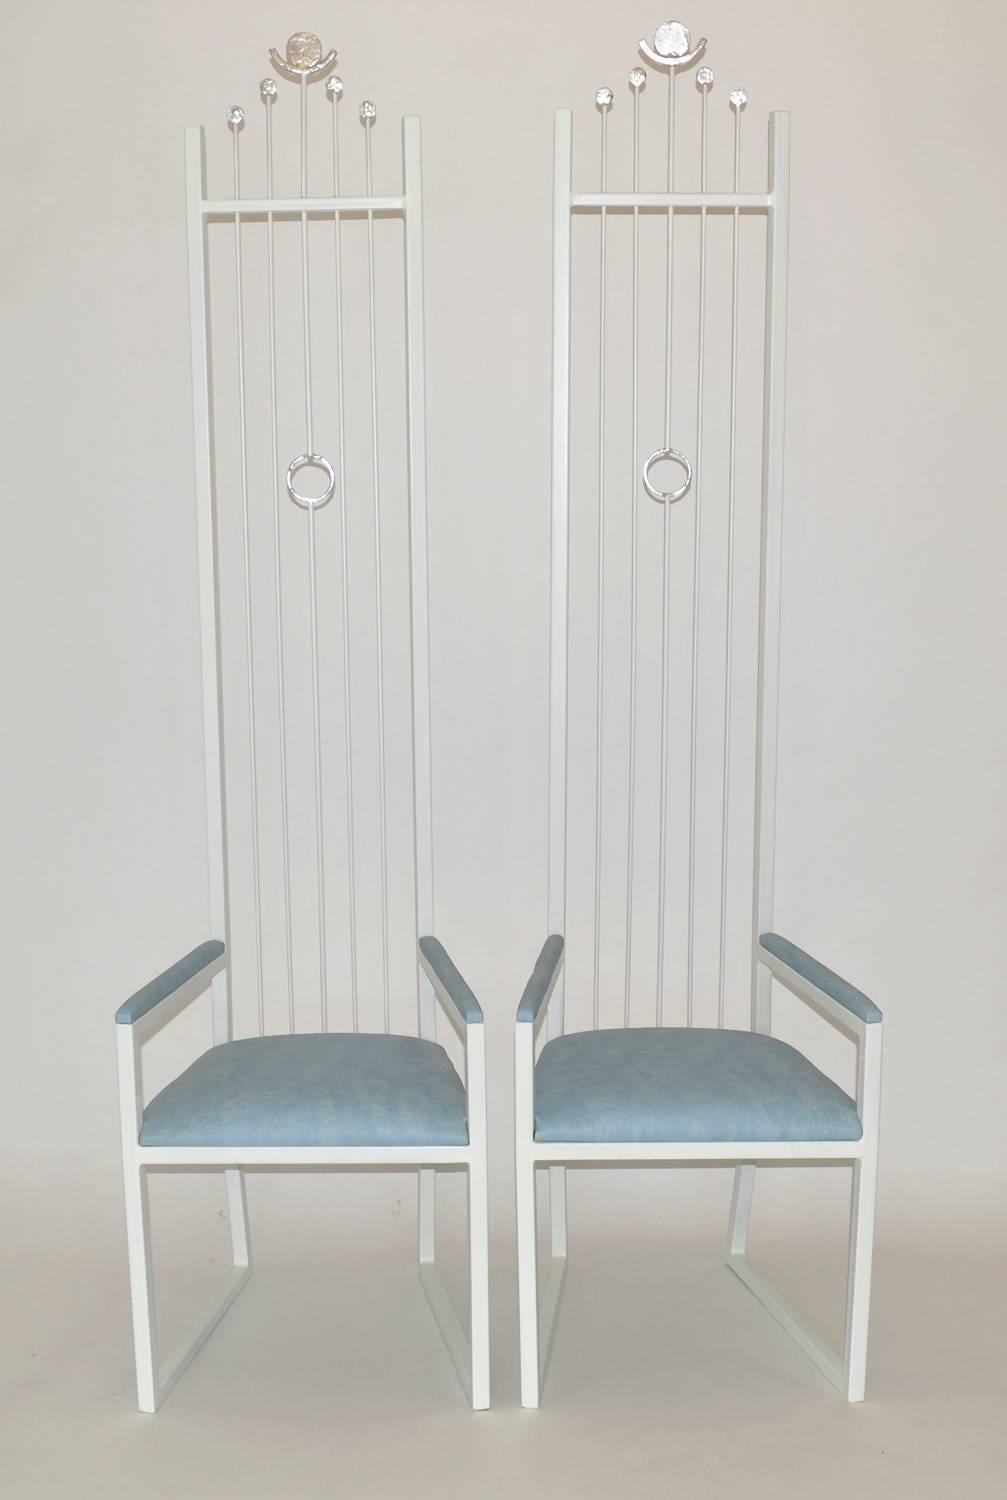 Fantasy Pop Surreal Steel Dining Chairs, France, 1980s
Unique Fantasy Pop Surreal Dining Chairs, France, 1980s
Set of four tall dining chairs, France, 1980s. Completely restored sculptural metal frames and rods in glacier white lacquer, with